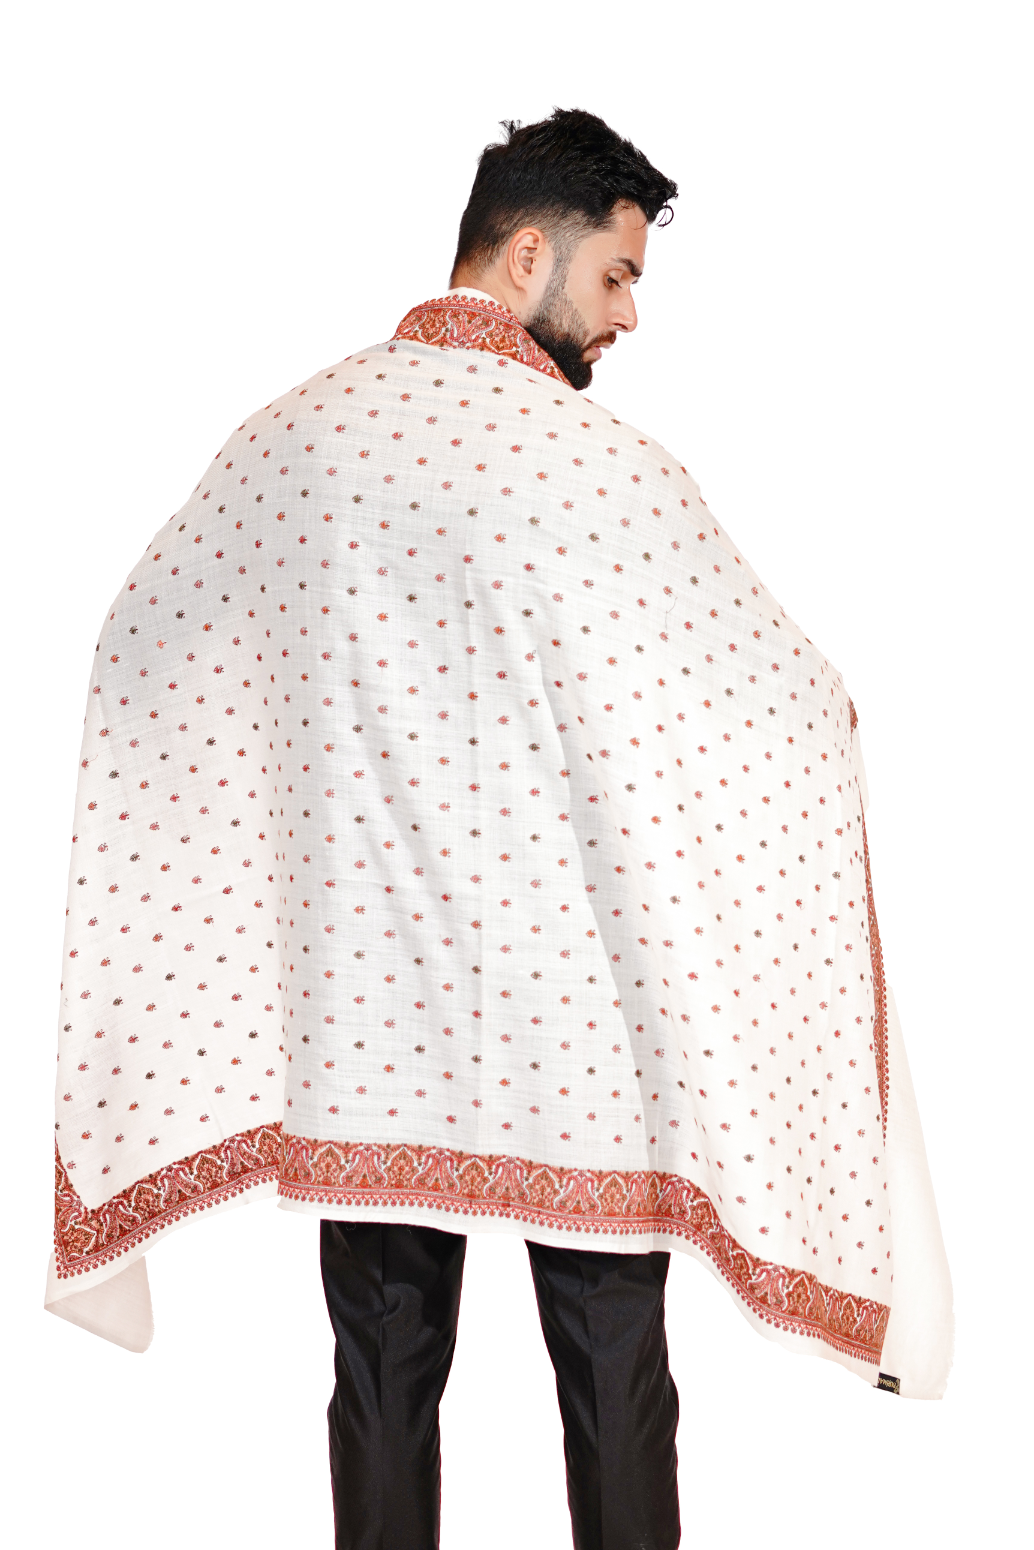 Men's Wool Shawl with Elegant Booti Embroidery & Borders